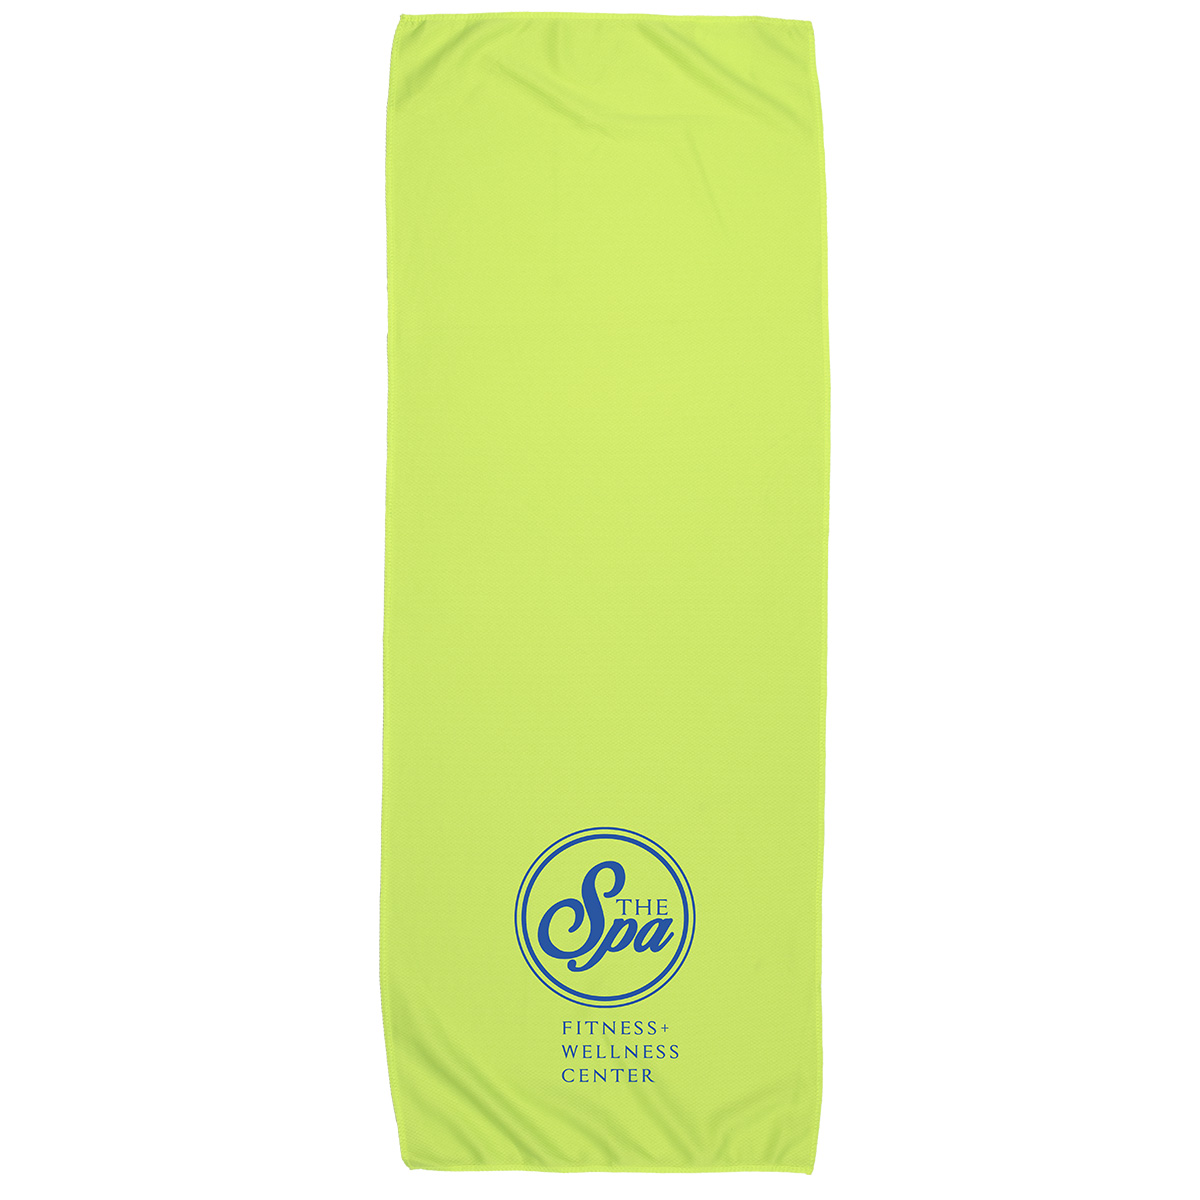 THE DELUXE Domestic Full Color Sublimation Cooling Towel - Innovation Line